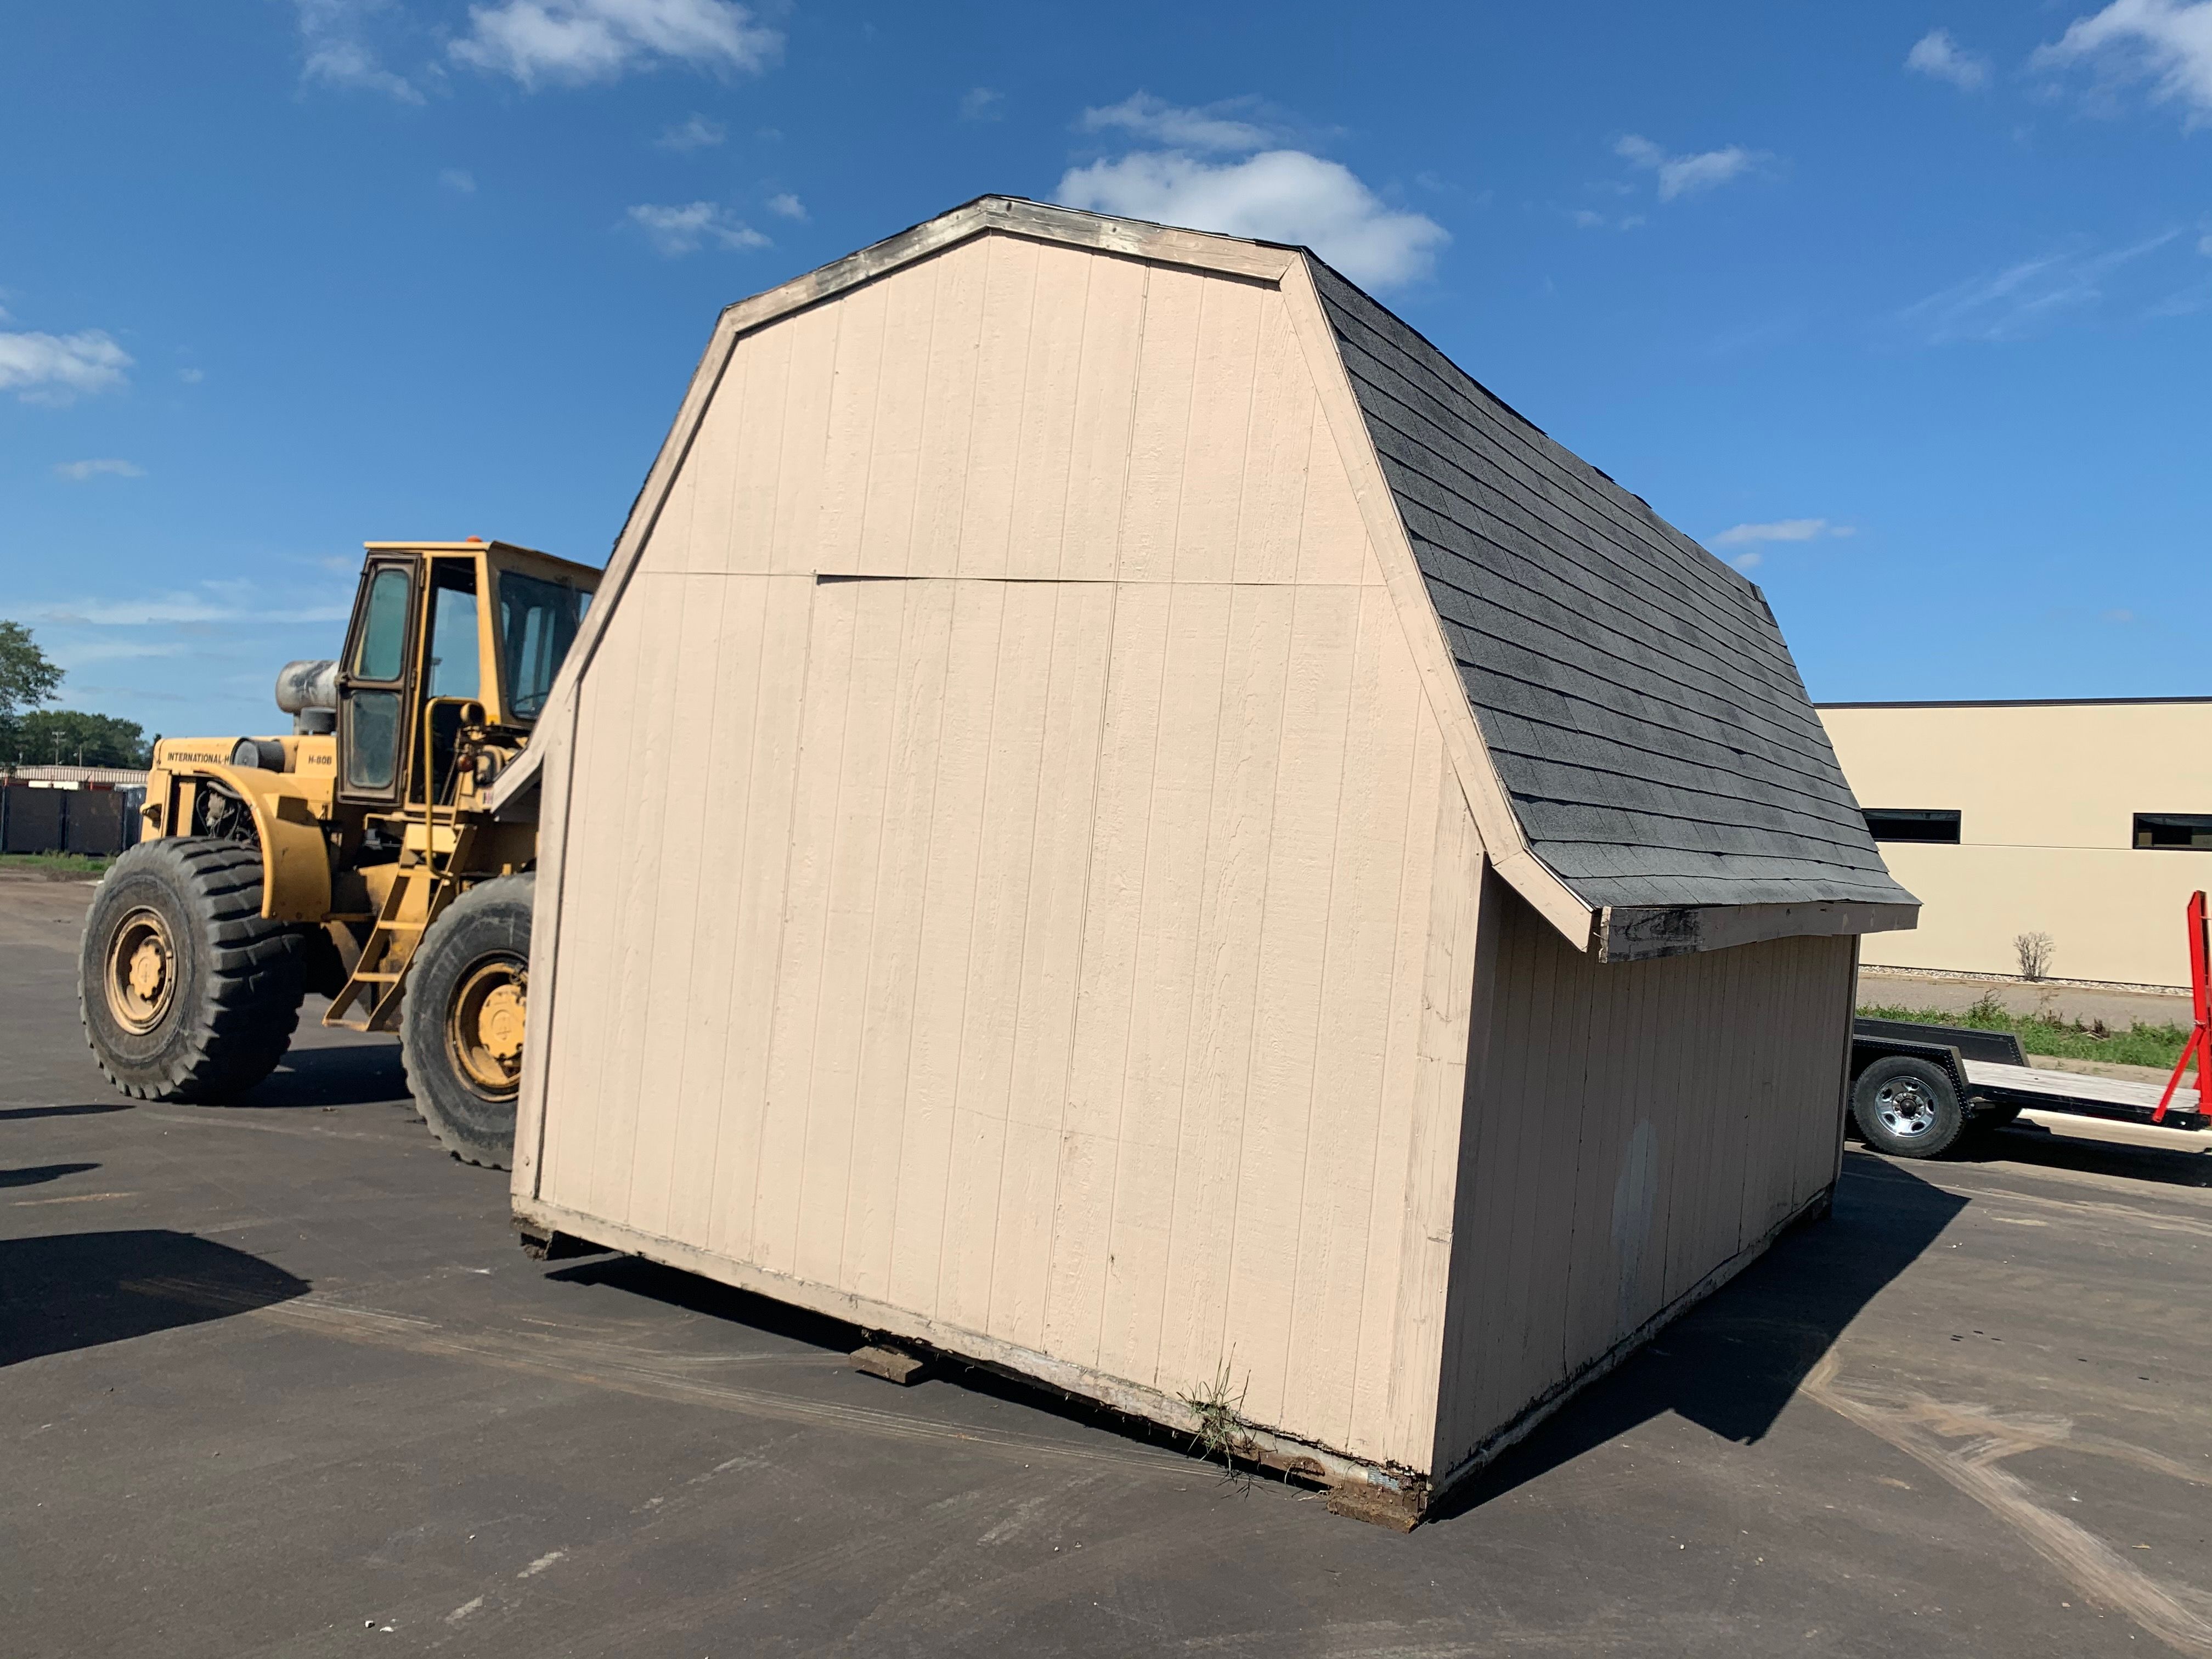 Sept. 10, 2020 - moving the shed